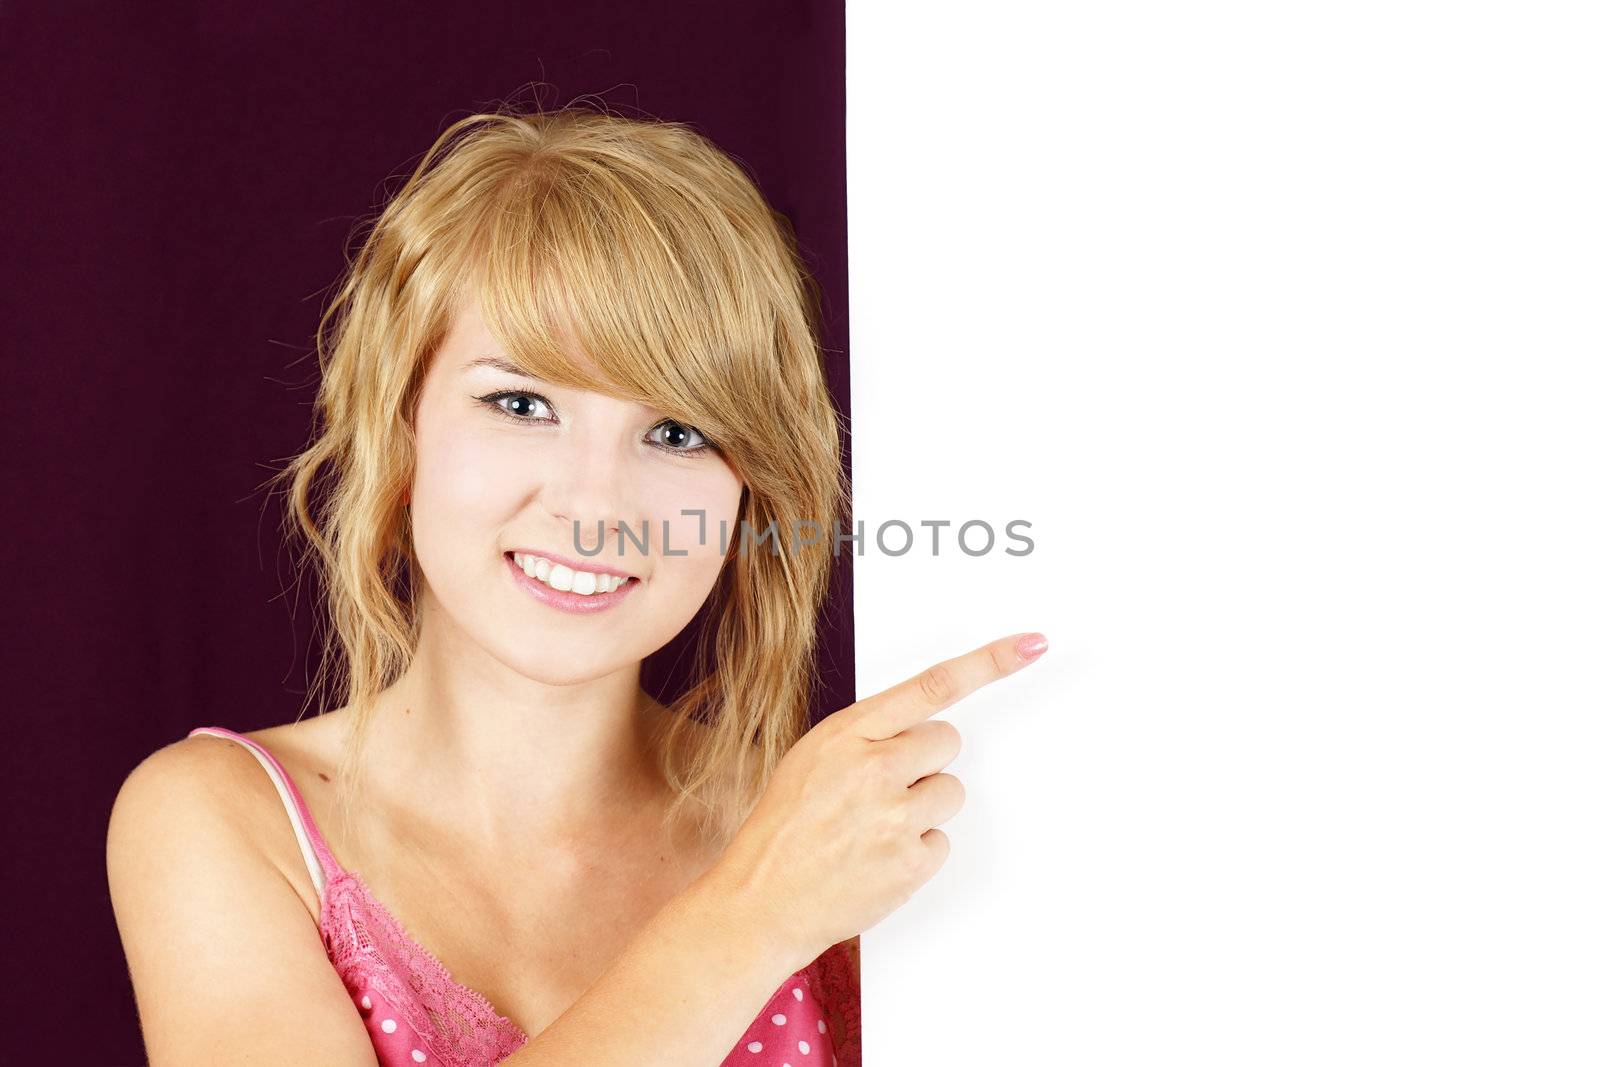 Cute and friendly smiling young blond teenager girl holding and pointing at a white blank sign, placard or billboard.